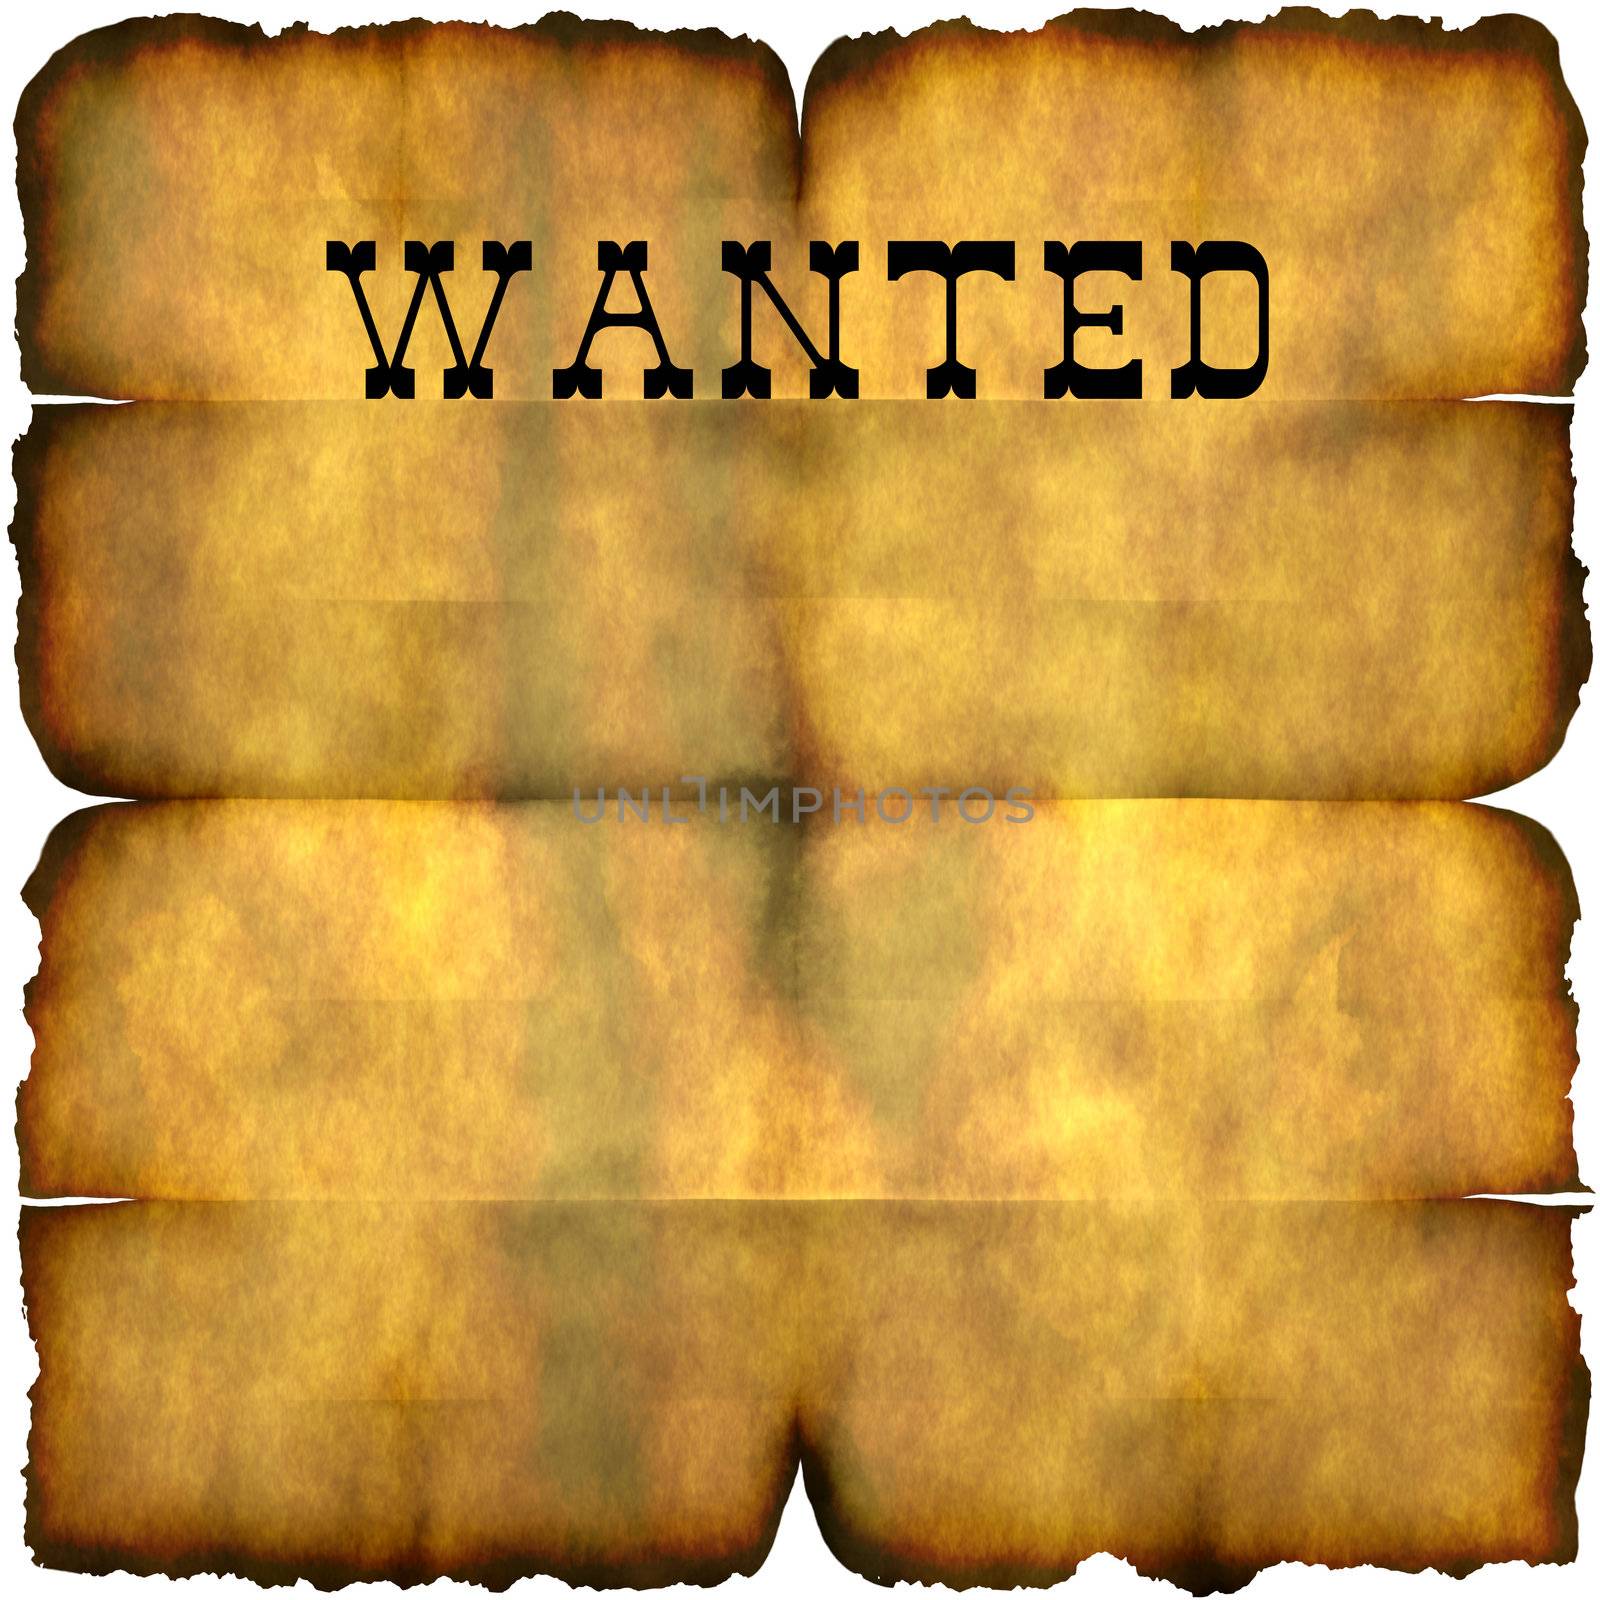 Wanted Poster by graficallyminded